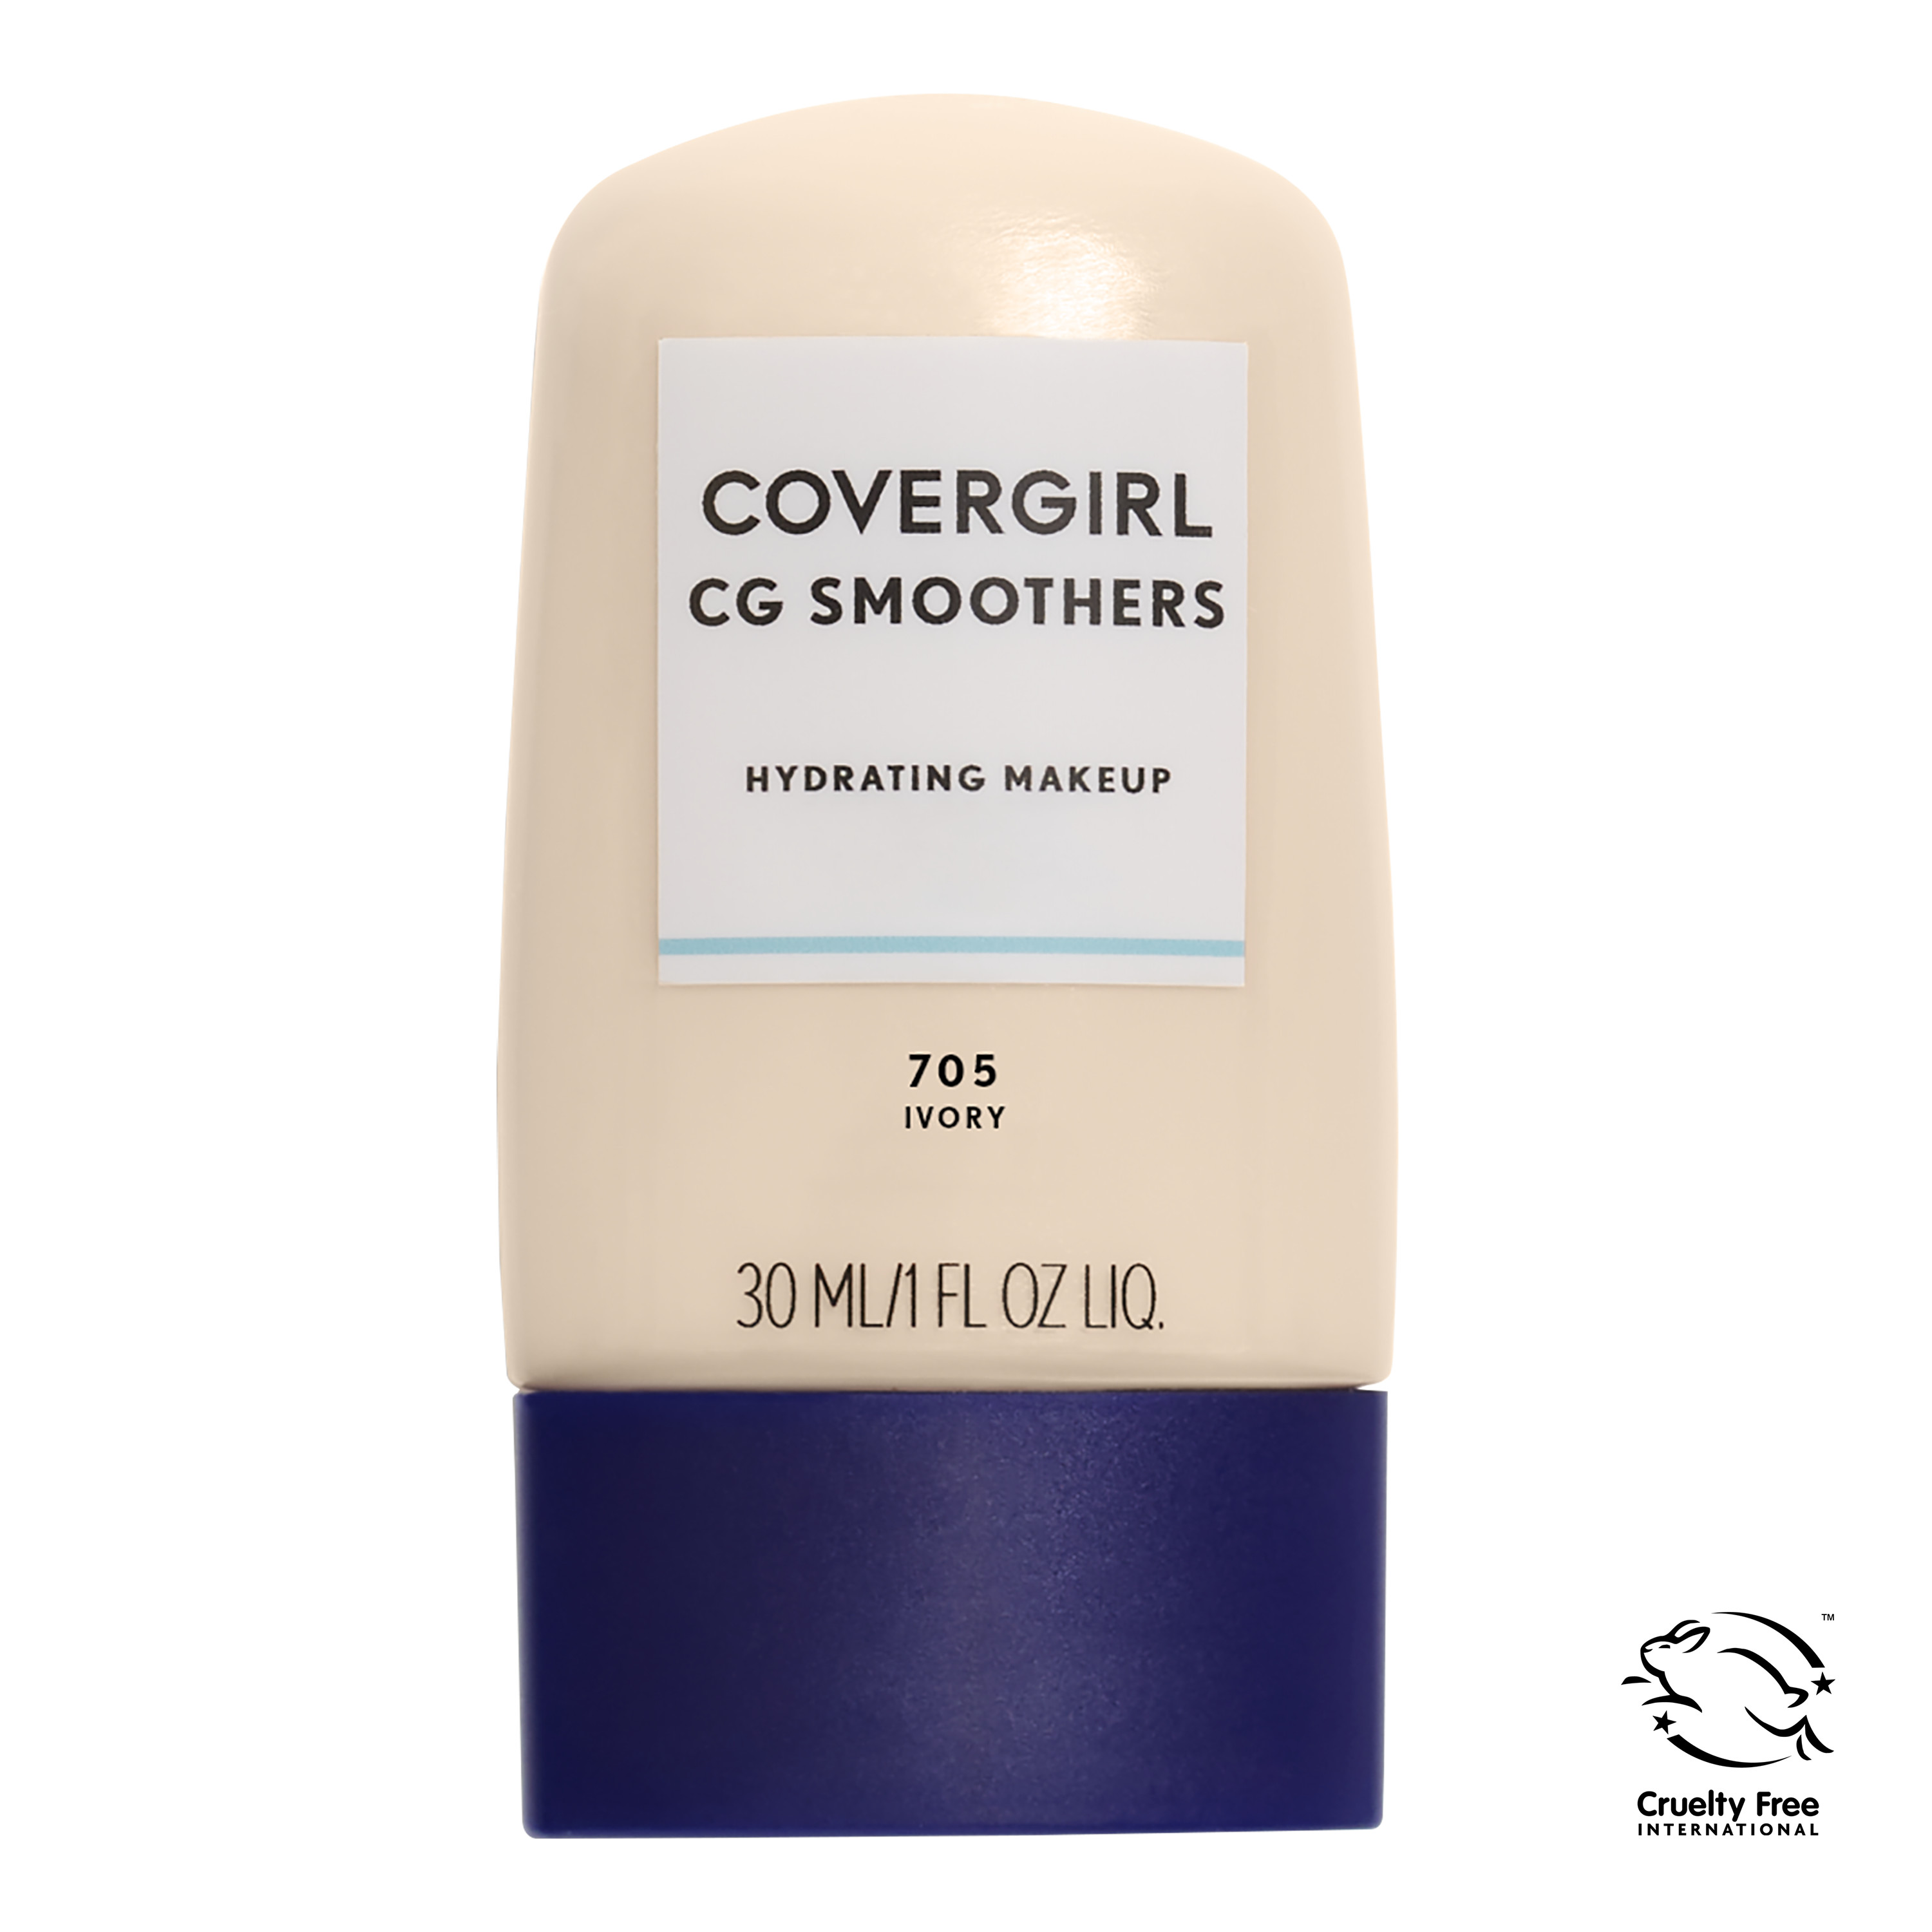 COVERGIRL Smoothers Hydrating Foundation, 705 Ivory, 1 Fl Oz, Hydrating Foundation, Cruelty Free Foundation, Liquid Foundation, Cream Foundation, Moisturizing Foundation - image 1 of 9